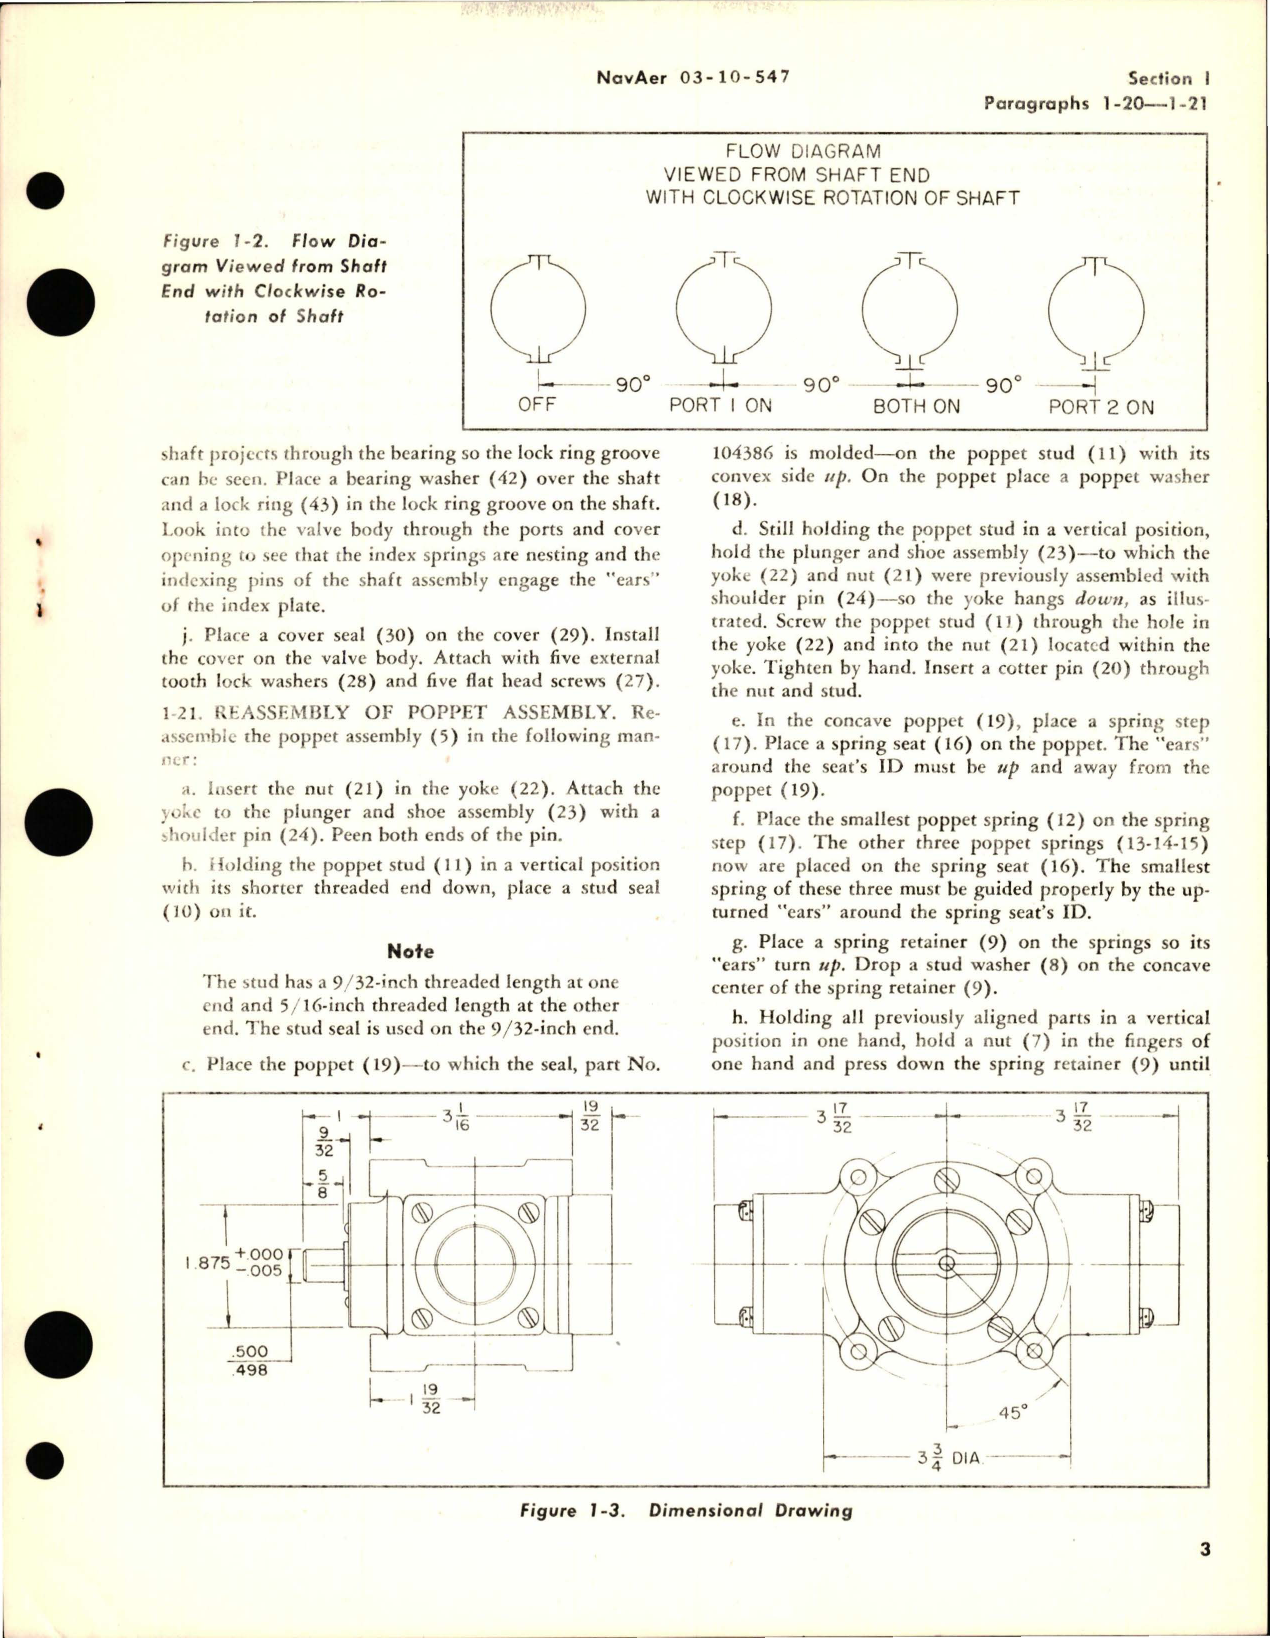 Sample page 5 from AirCorps Library document: Overhaul Instructions with Parts Catalog for High Pressure Engine Selector Valve - Model 114311